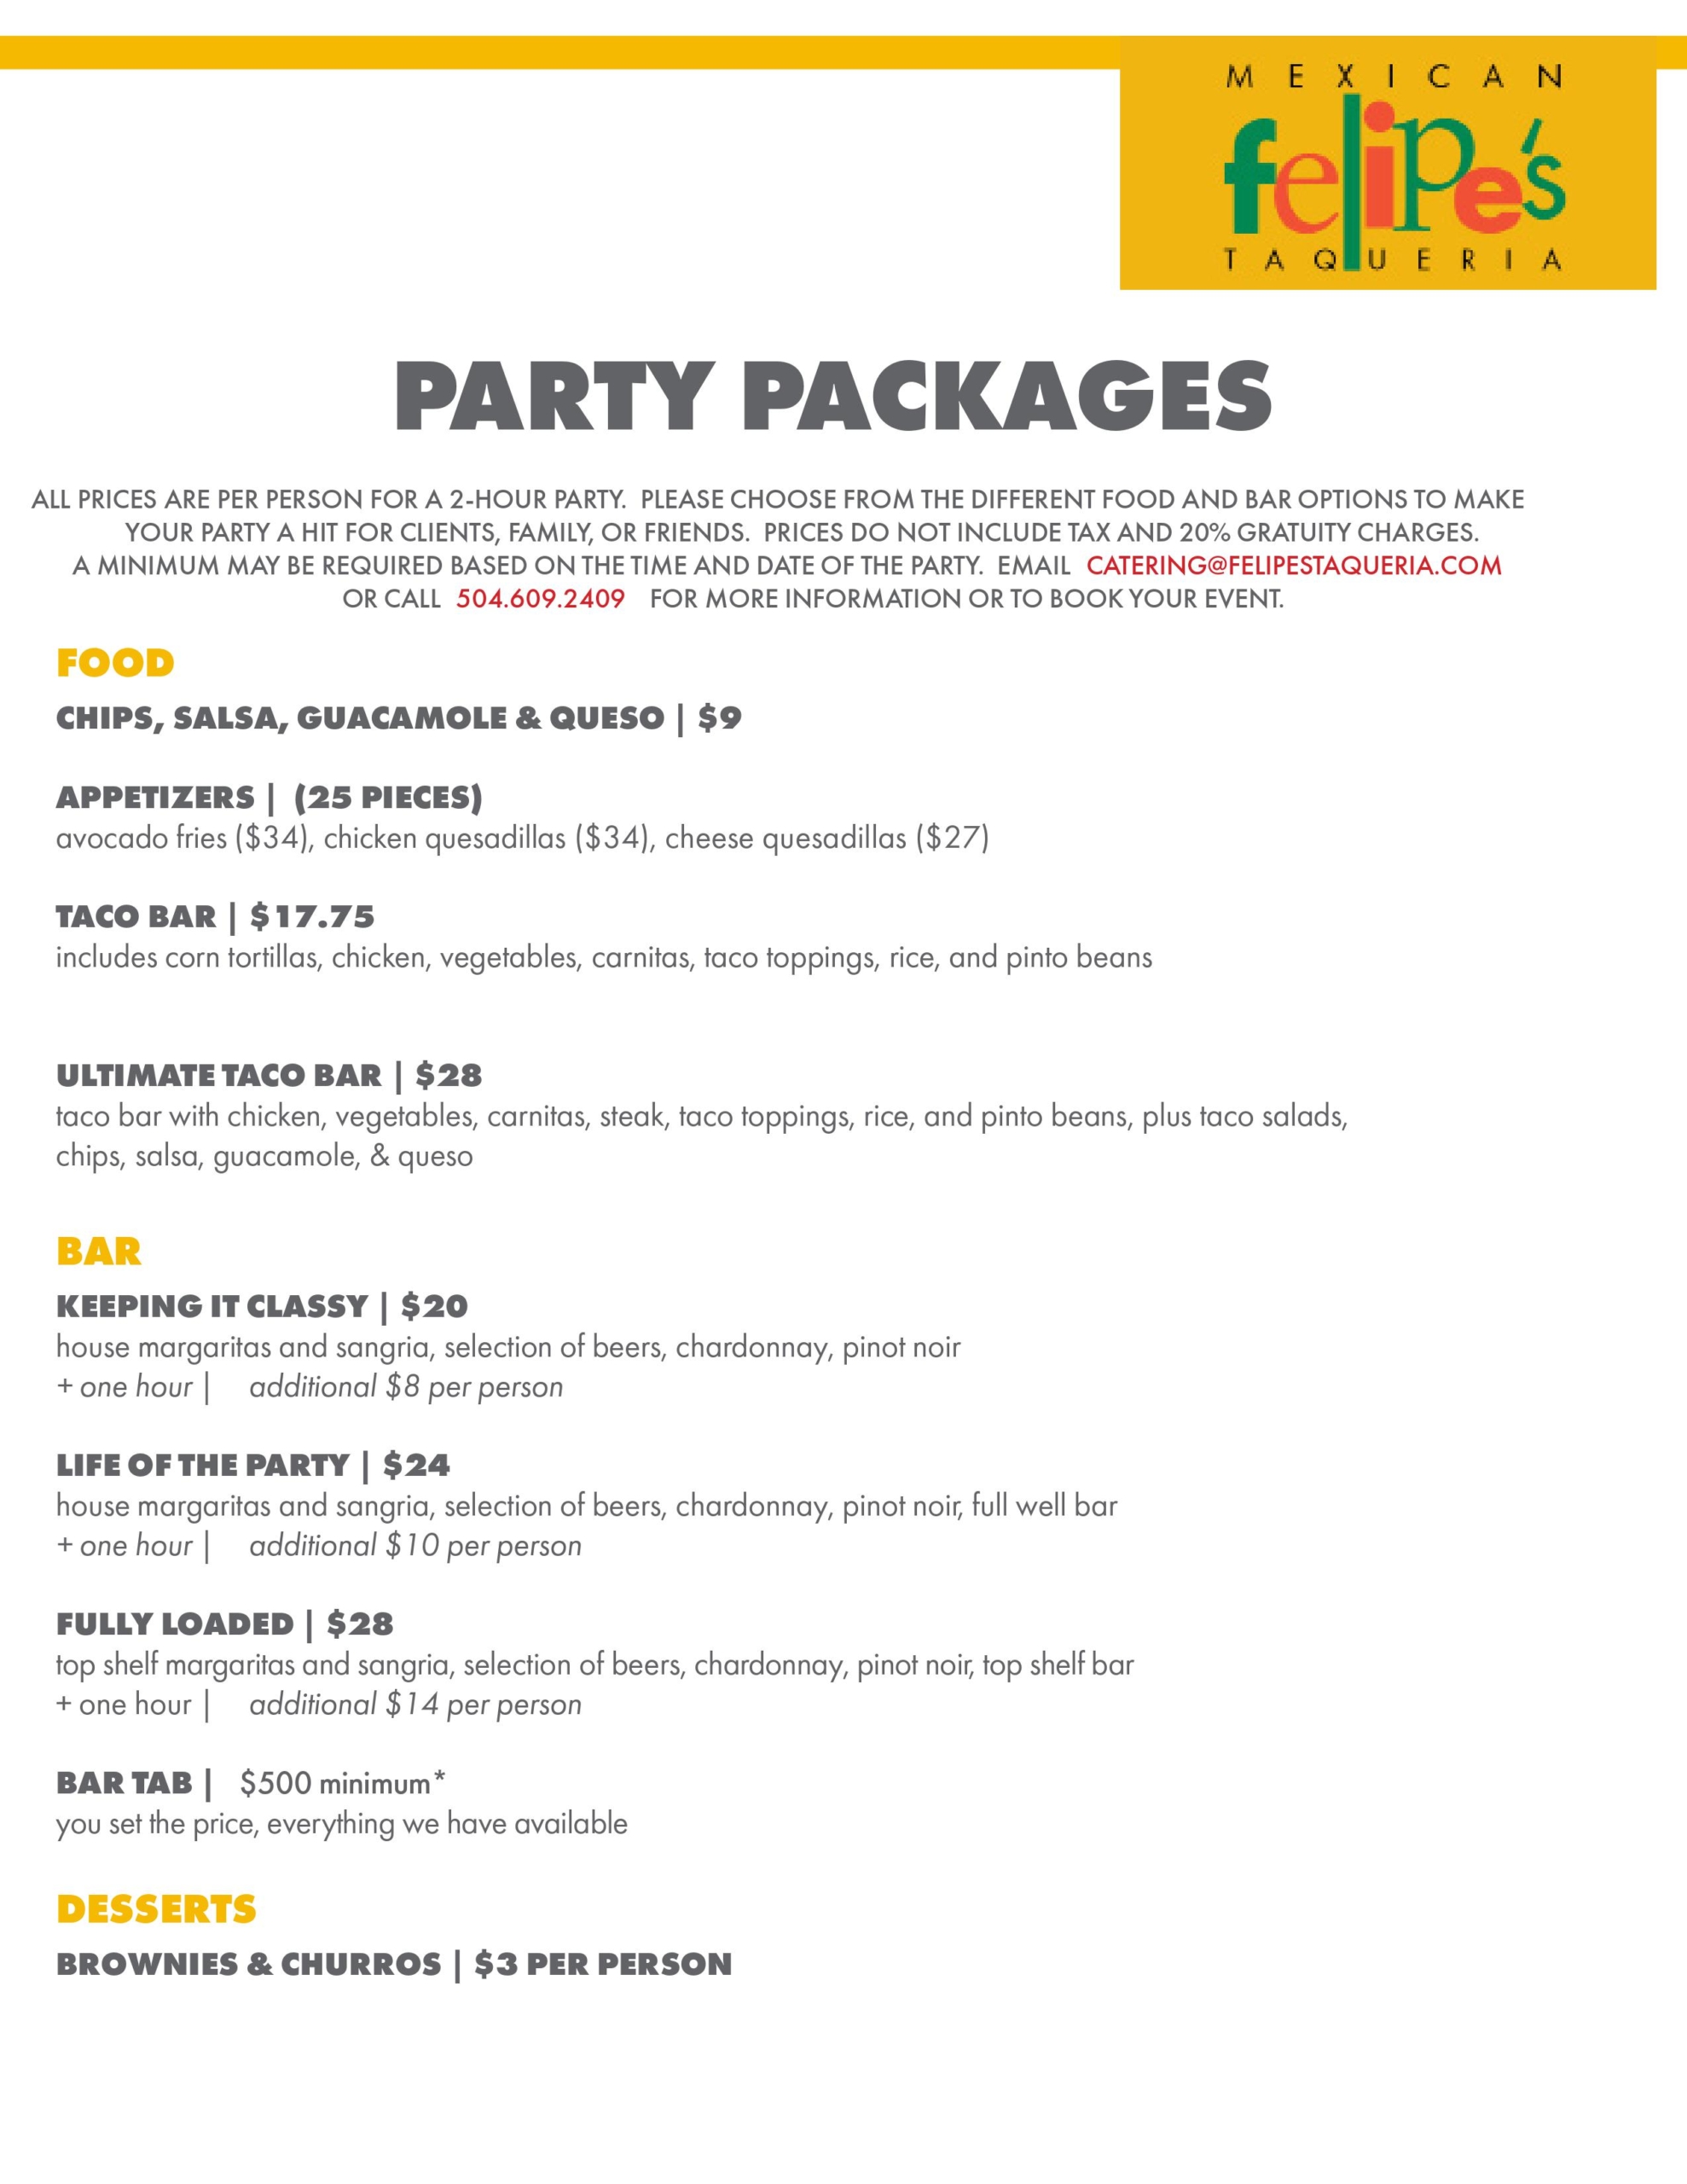 Private Party Pricing